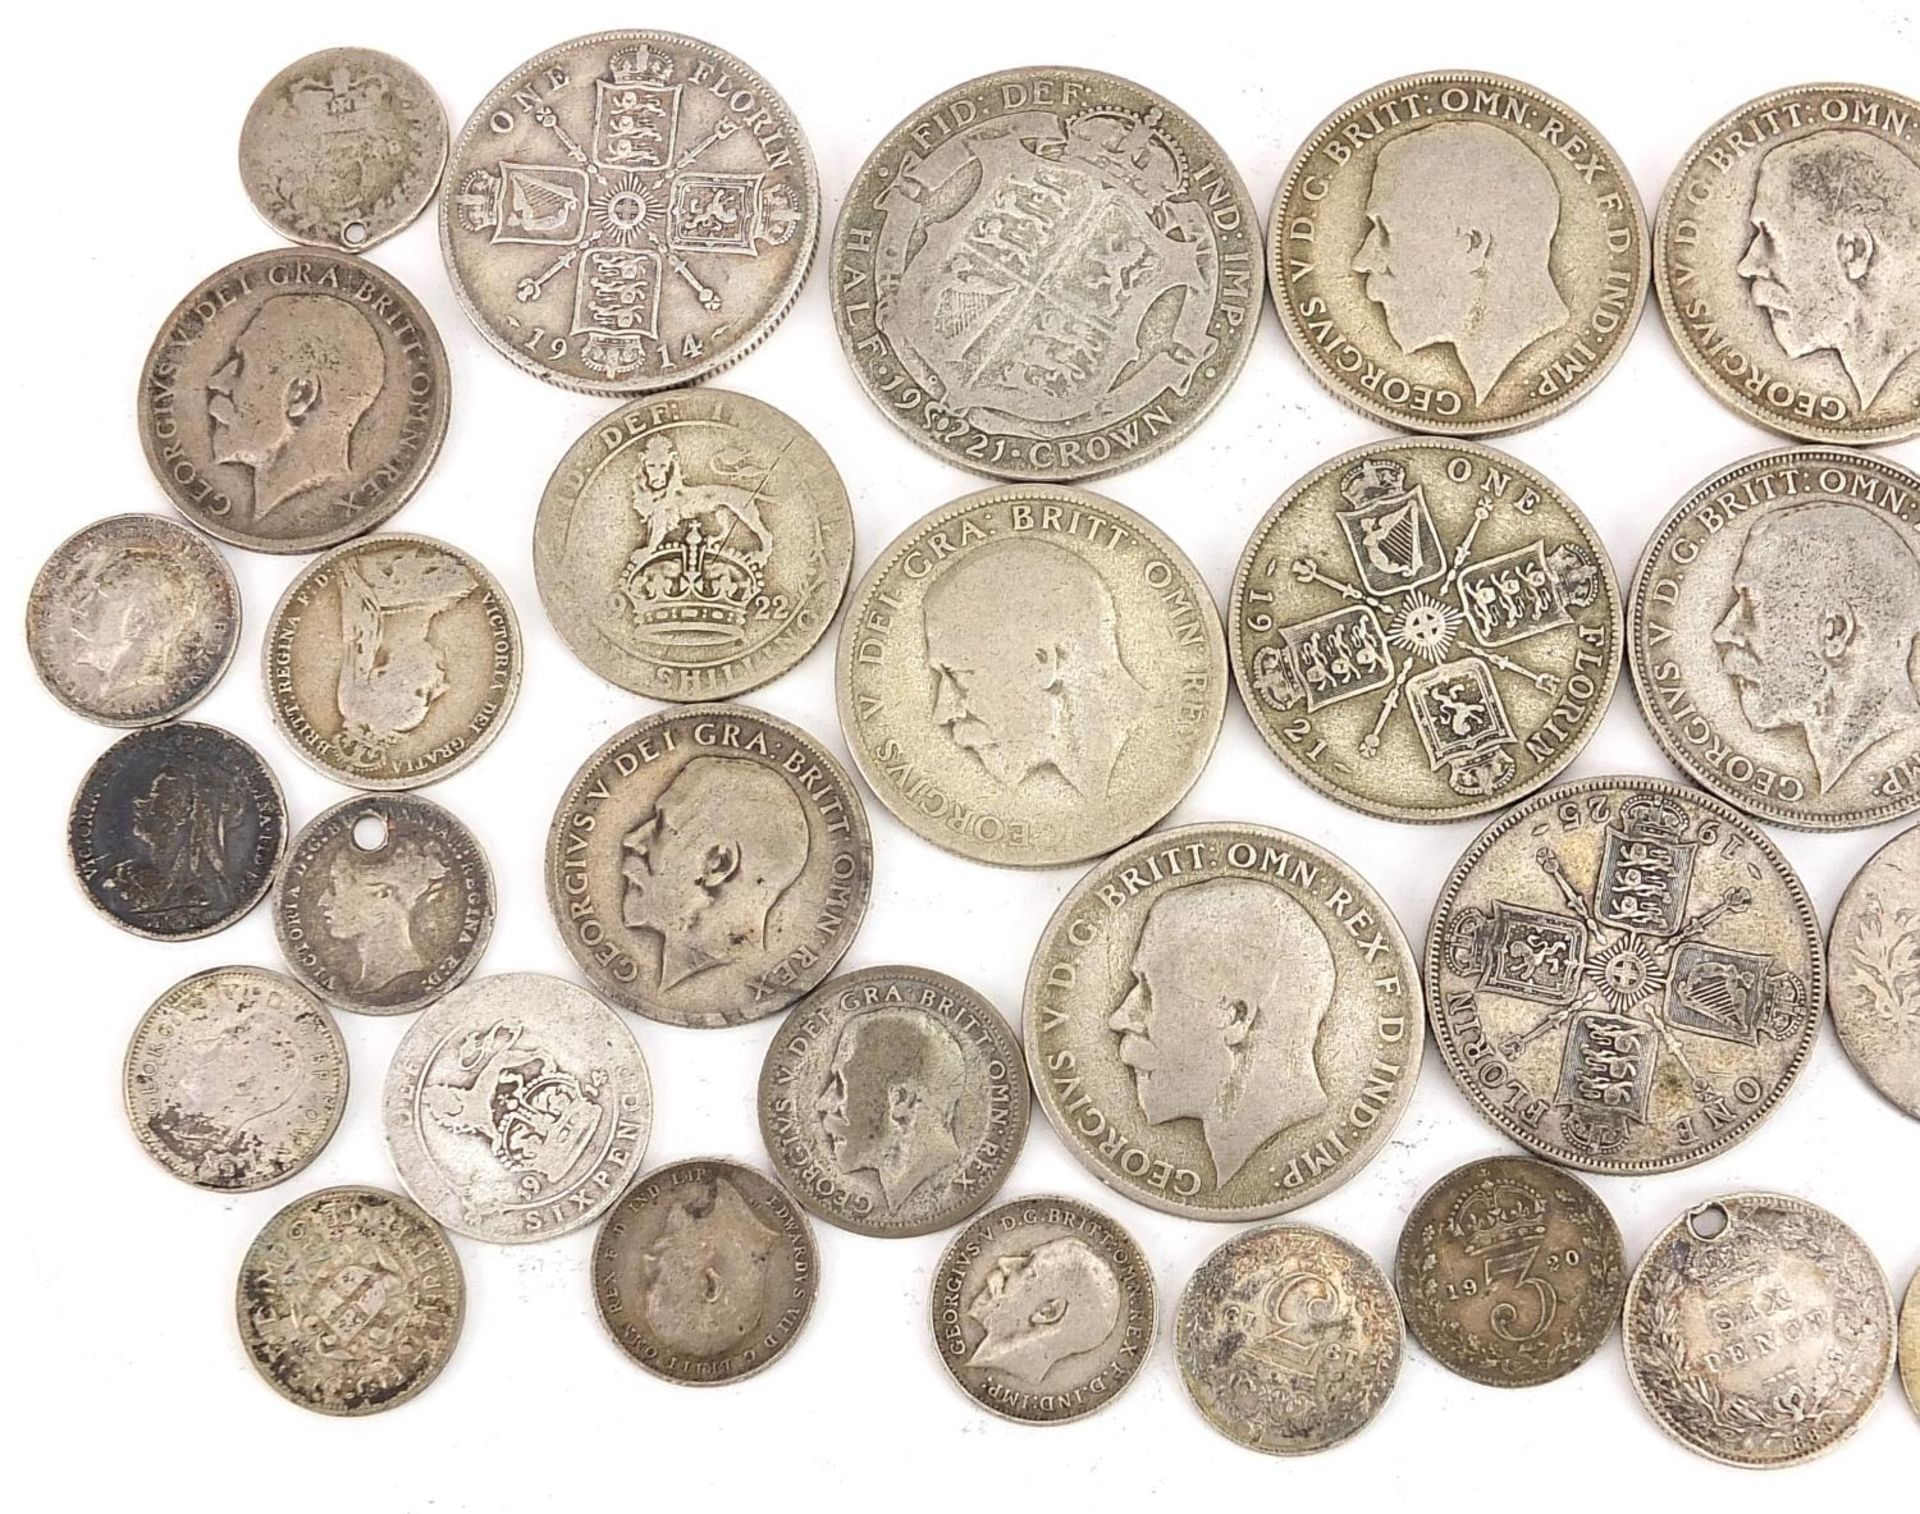 Victorian and later British coinage including florins, shillings and sixpences, 200g - Image 2 of 3